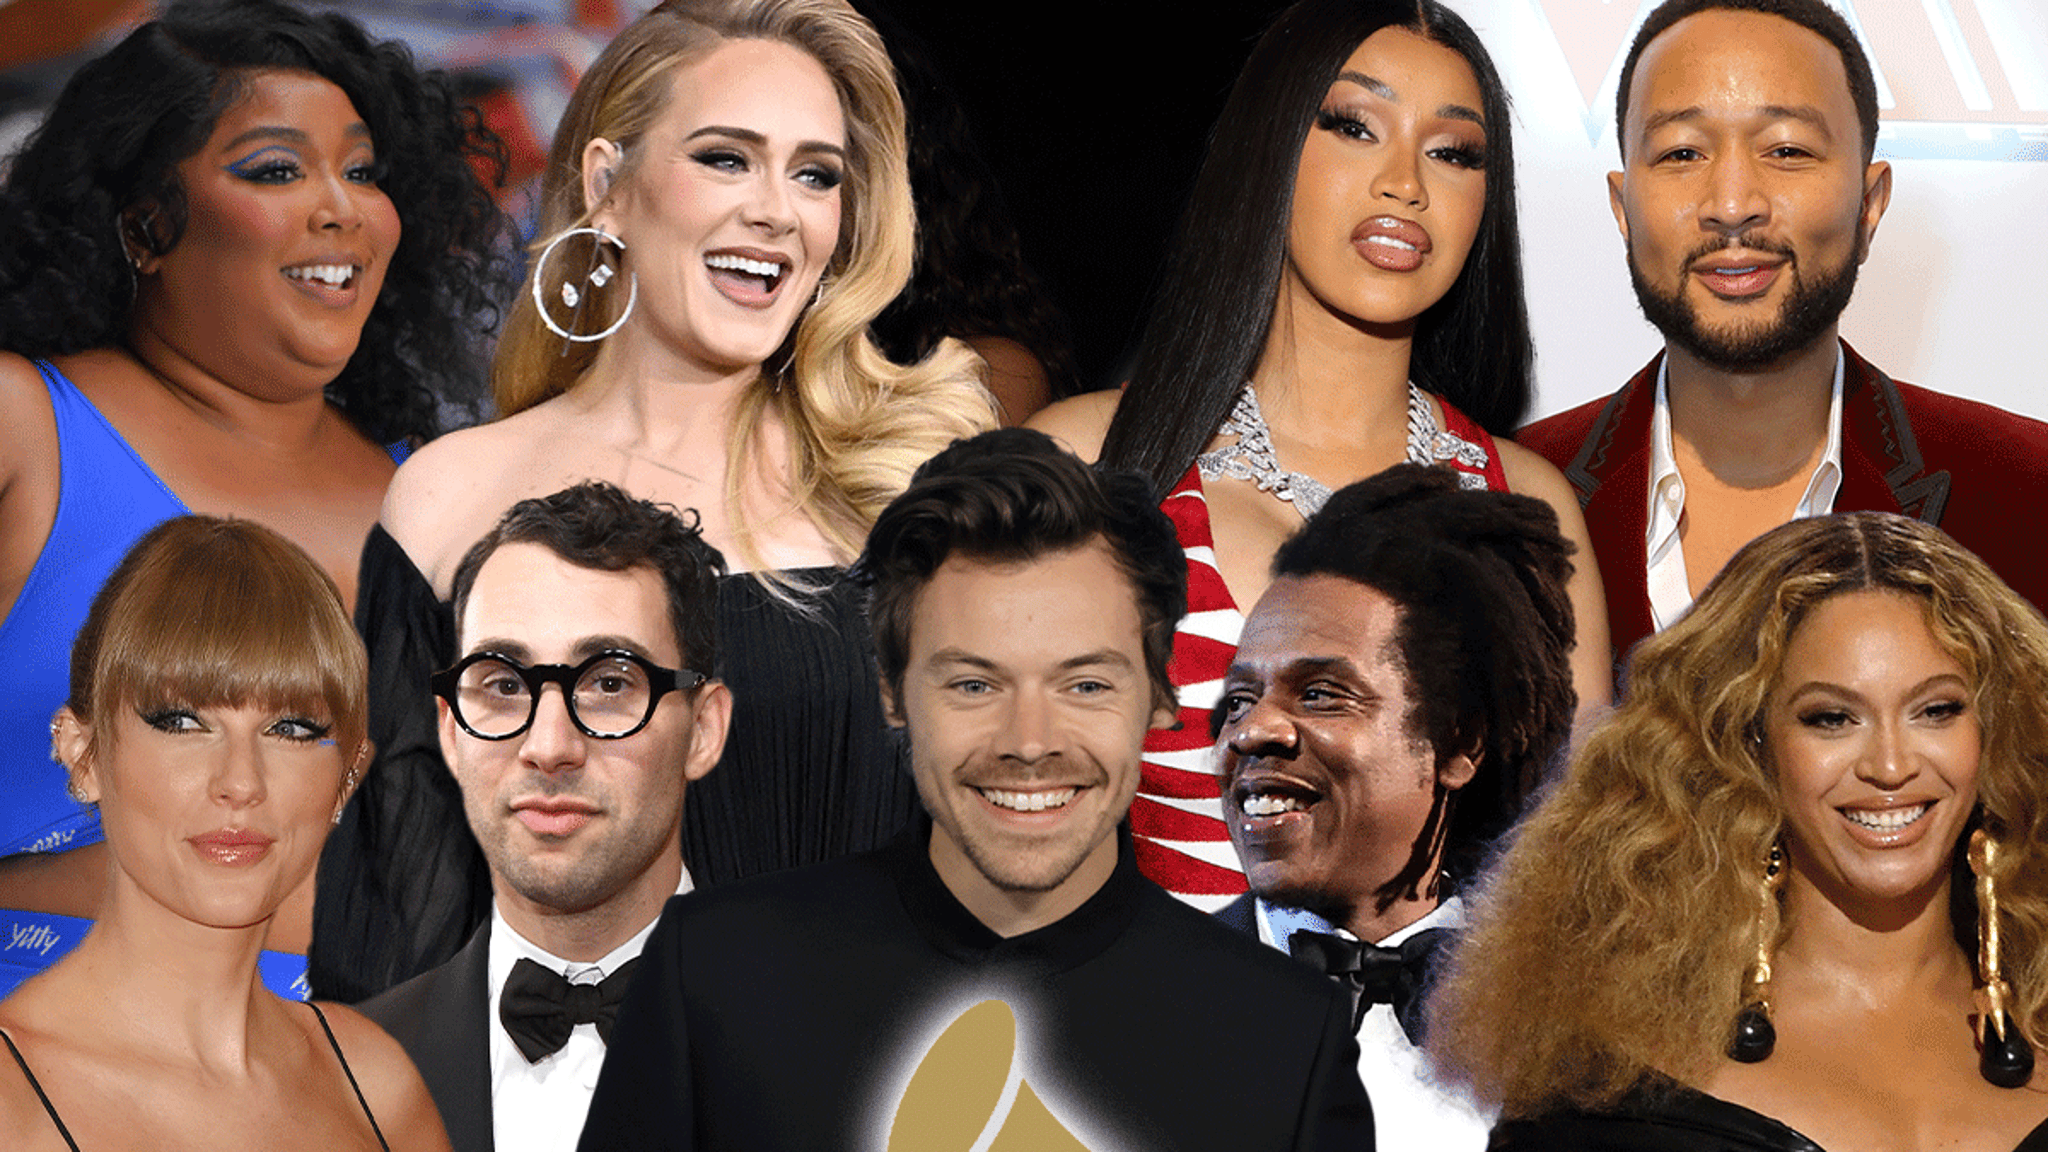 65th Grammys Seating Arrangement, Here’s Who’s Sitting Next to Who